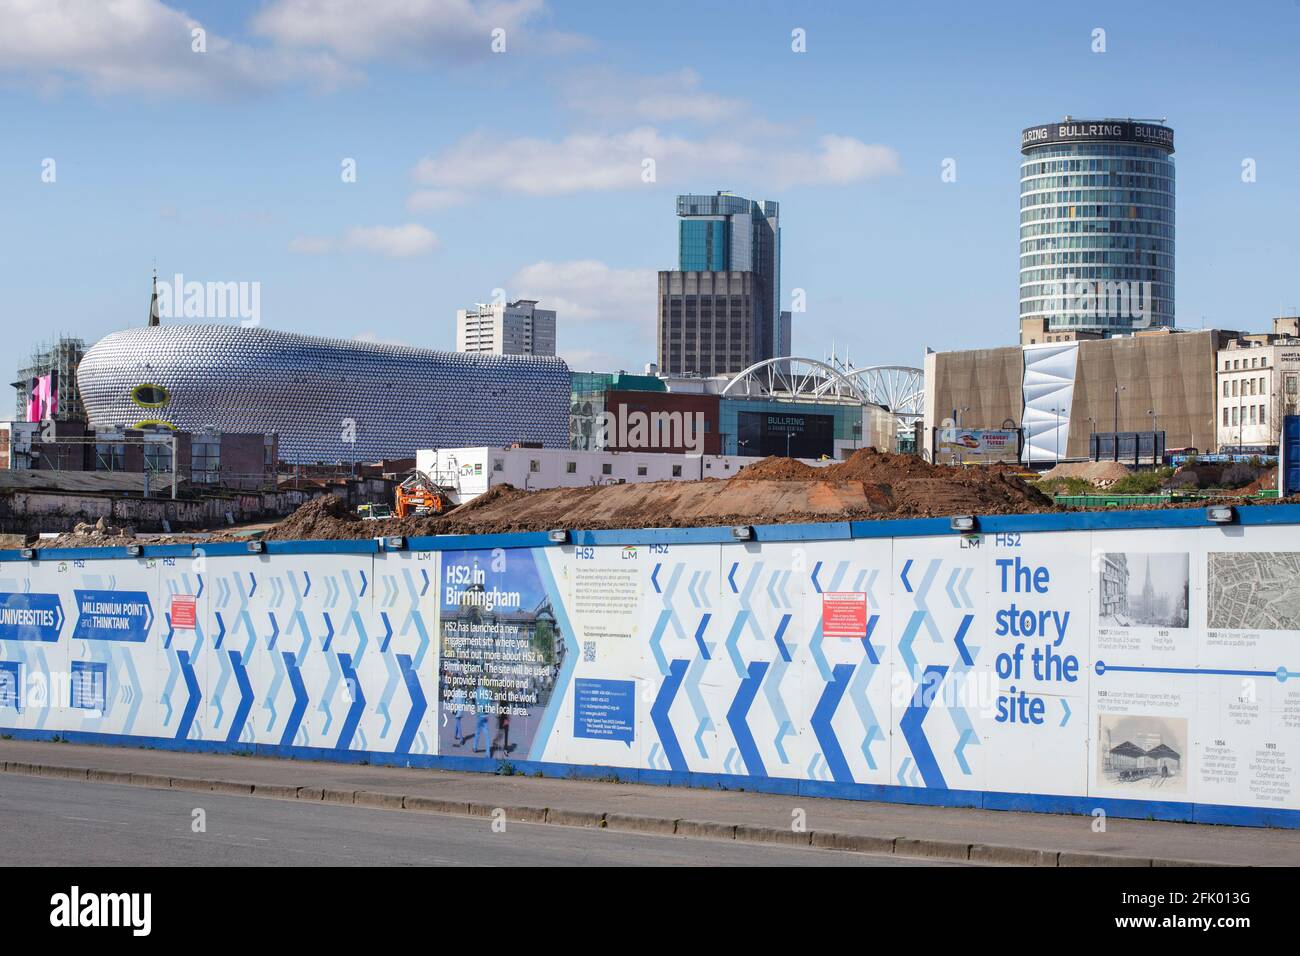 The building site for the HS2 rail route through Birmingham seen from Curzon Street. The Selfridges store and the Rotunda are in the background. Stock Photo